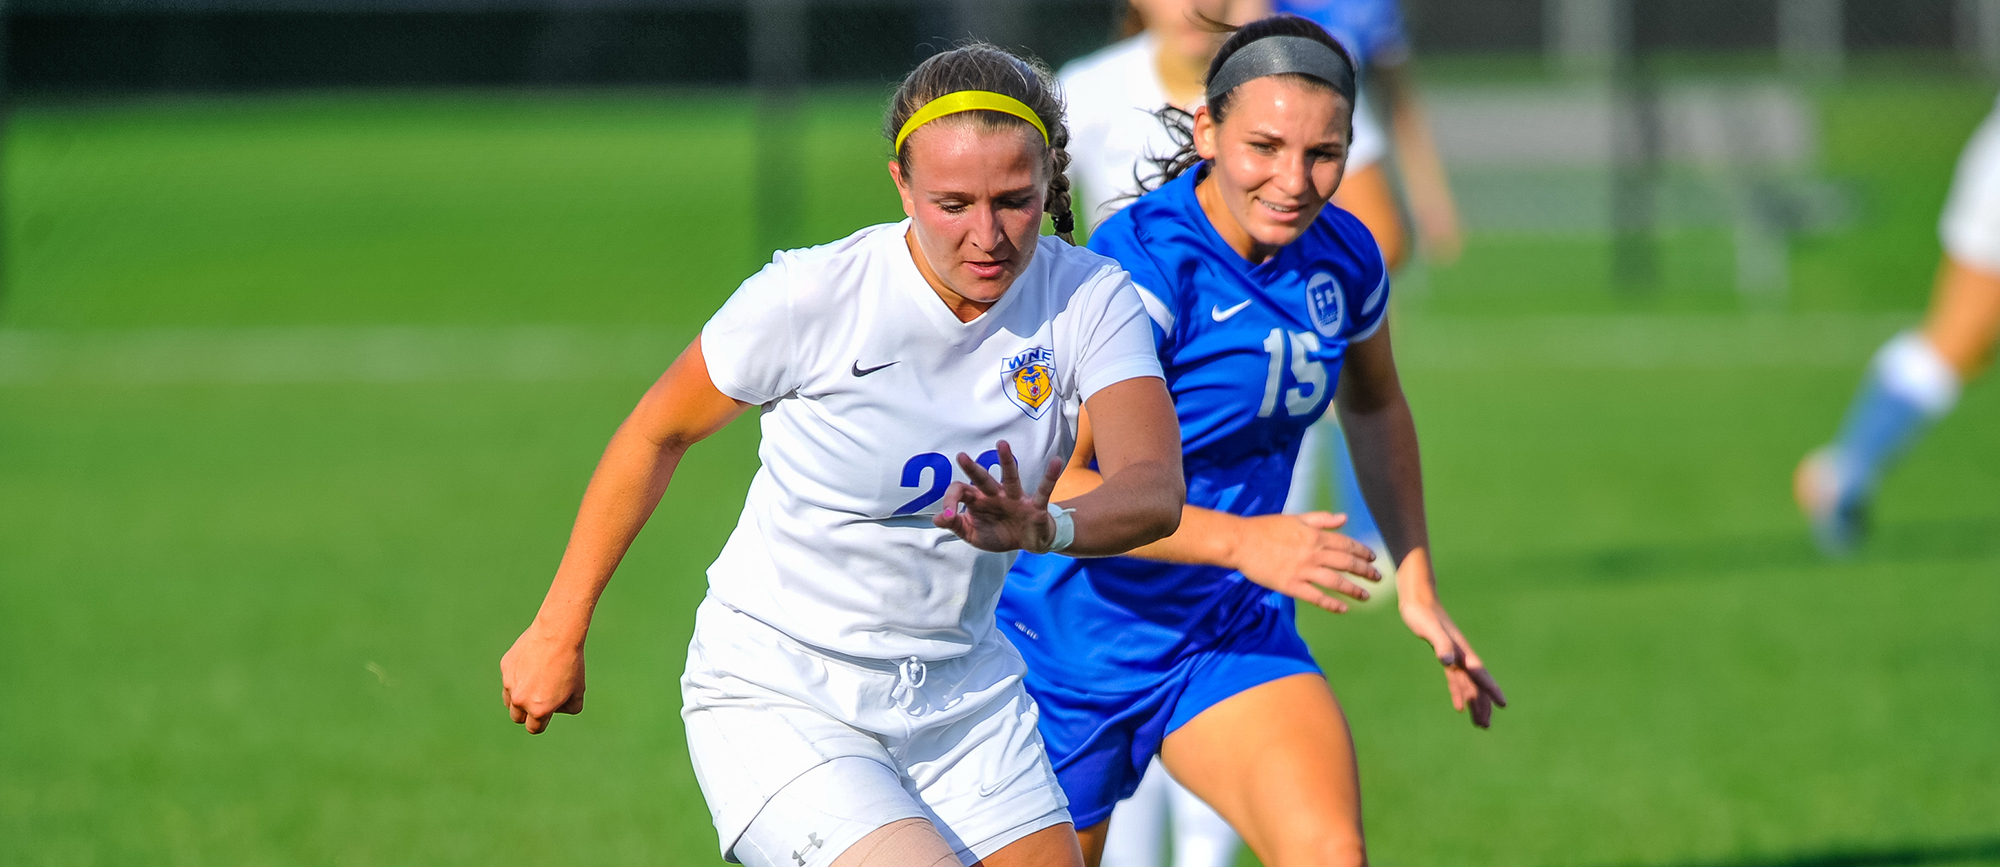 Golden Bears Battle to 1-1 Draw with Westfield State